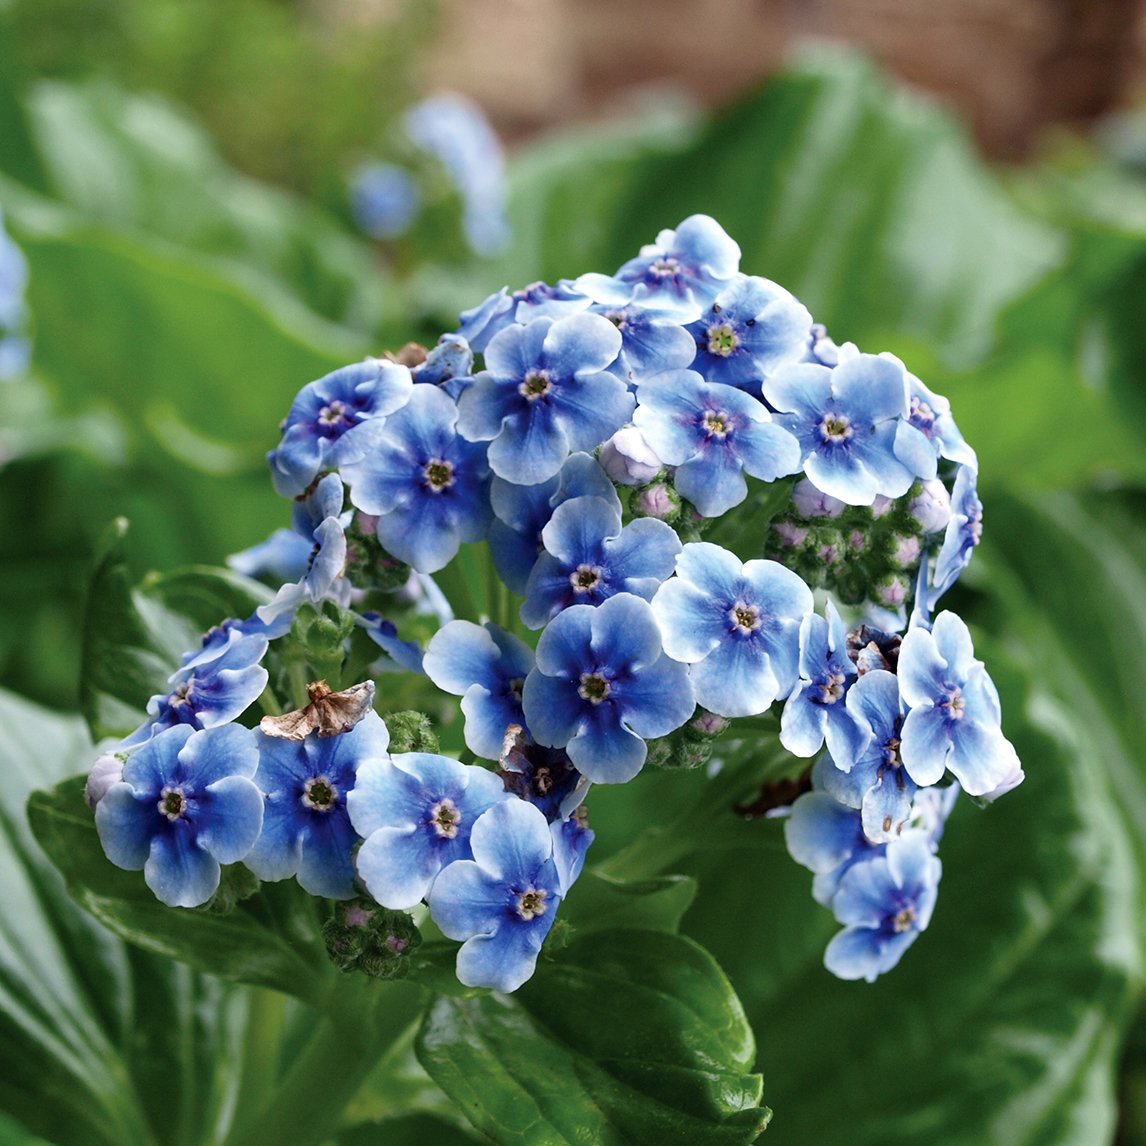 Chatham Island Forget-Me-Not